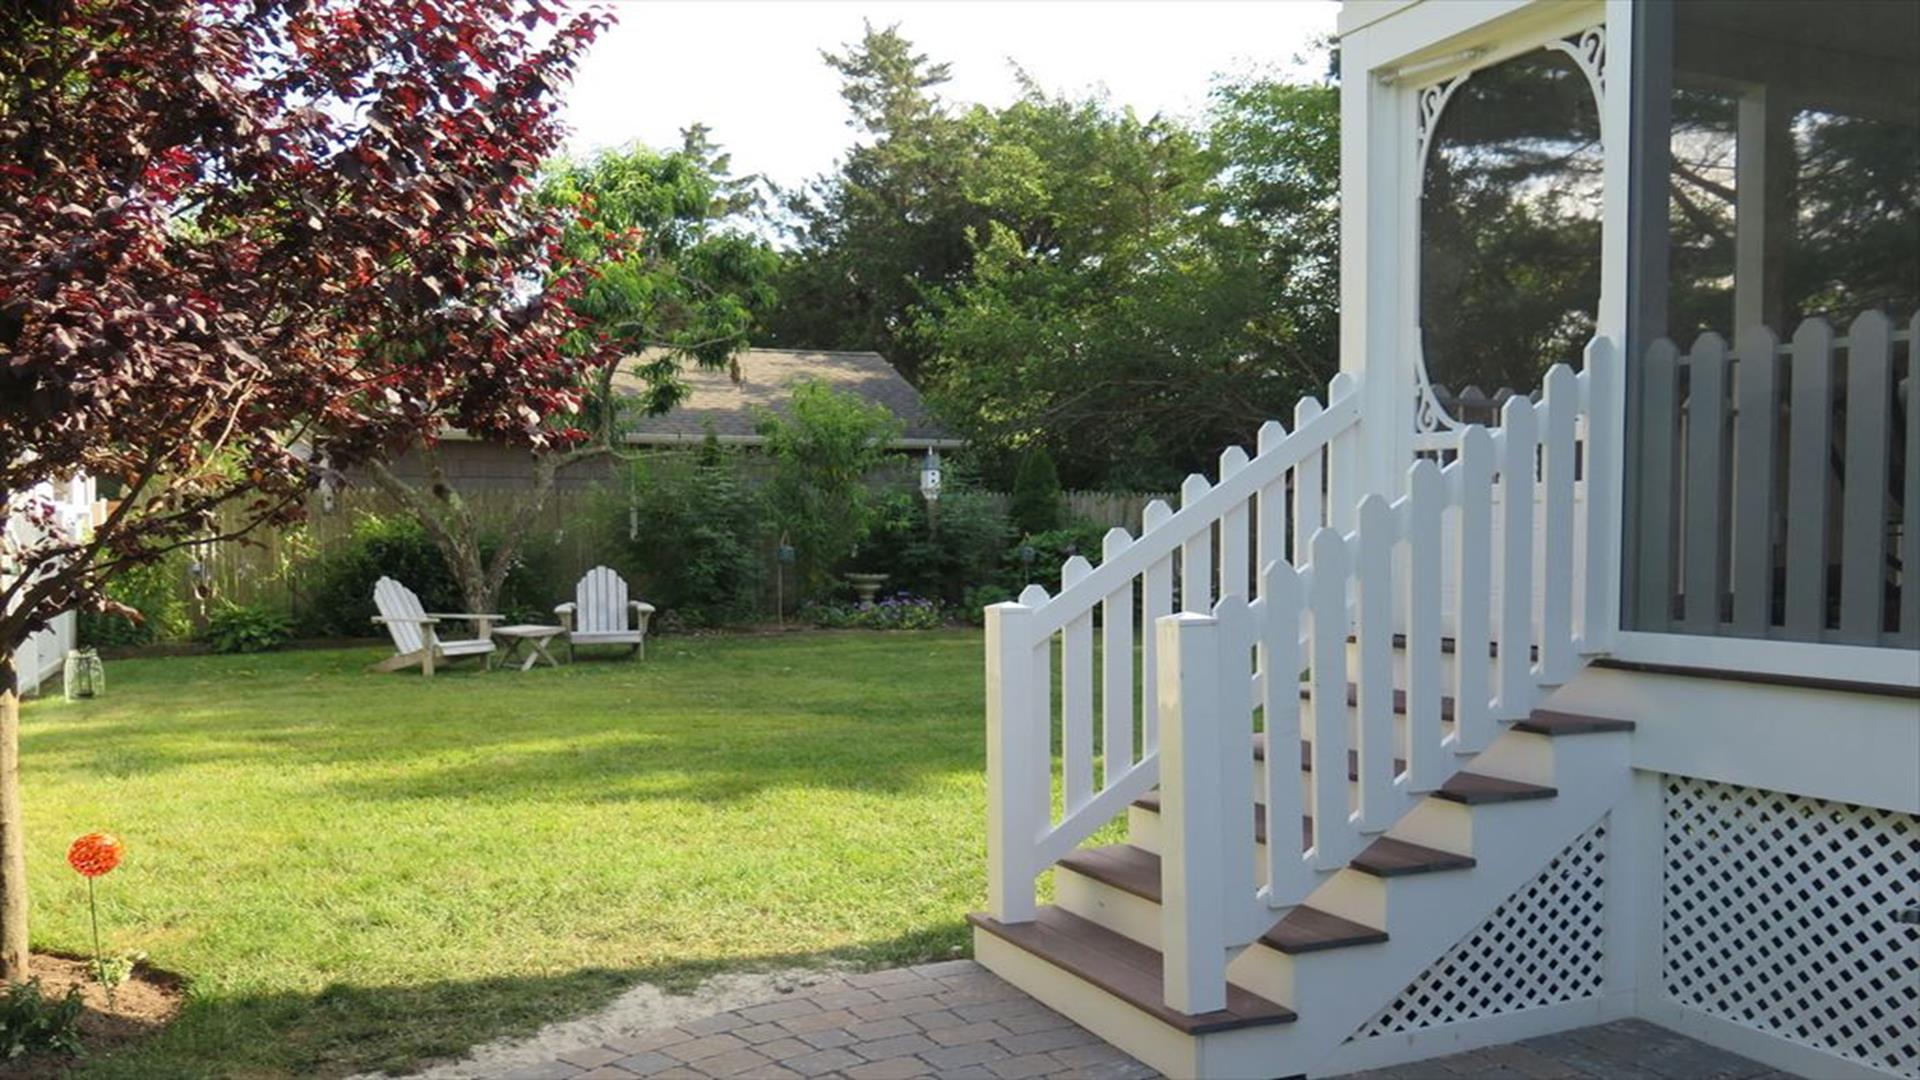 Vacation Rentals West Cape May Seastar Cottage